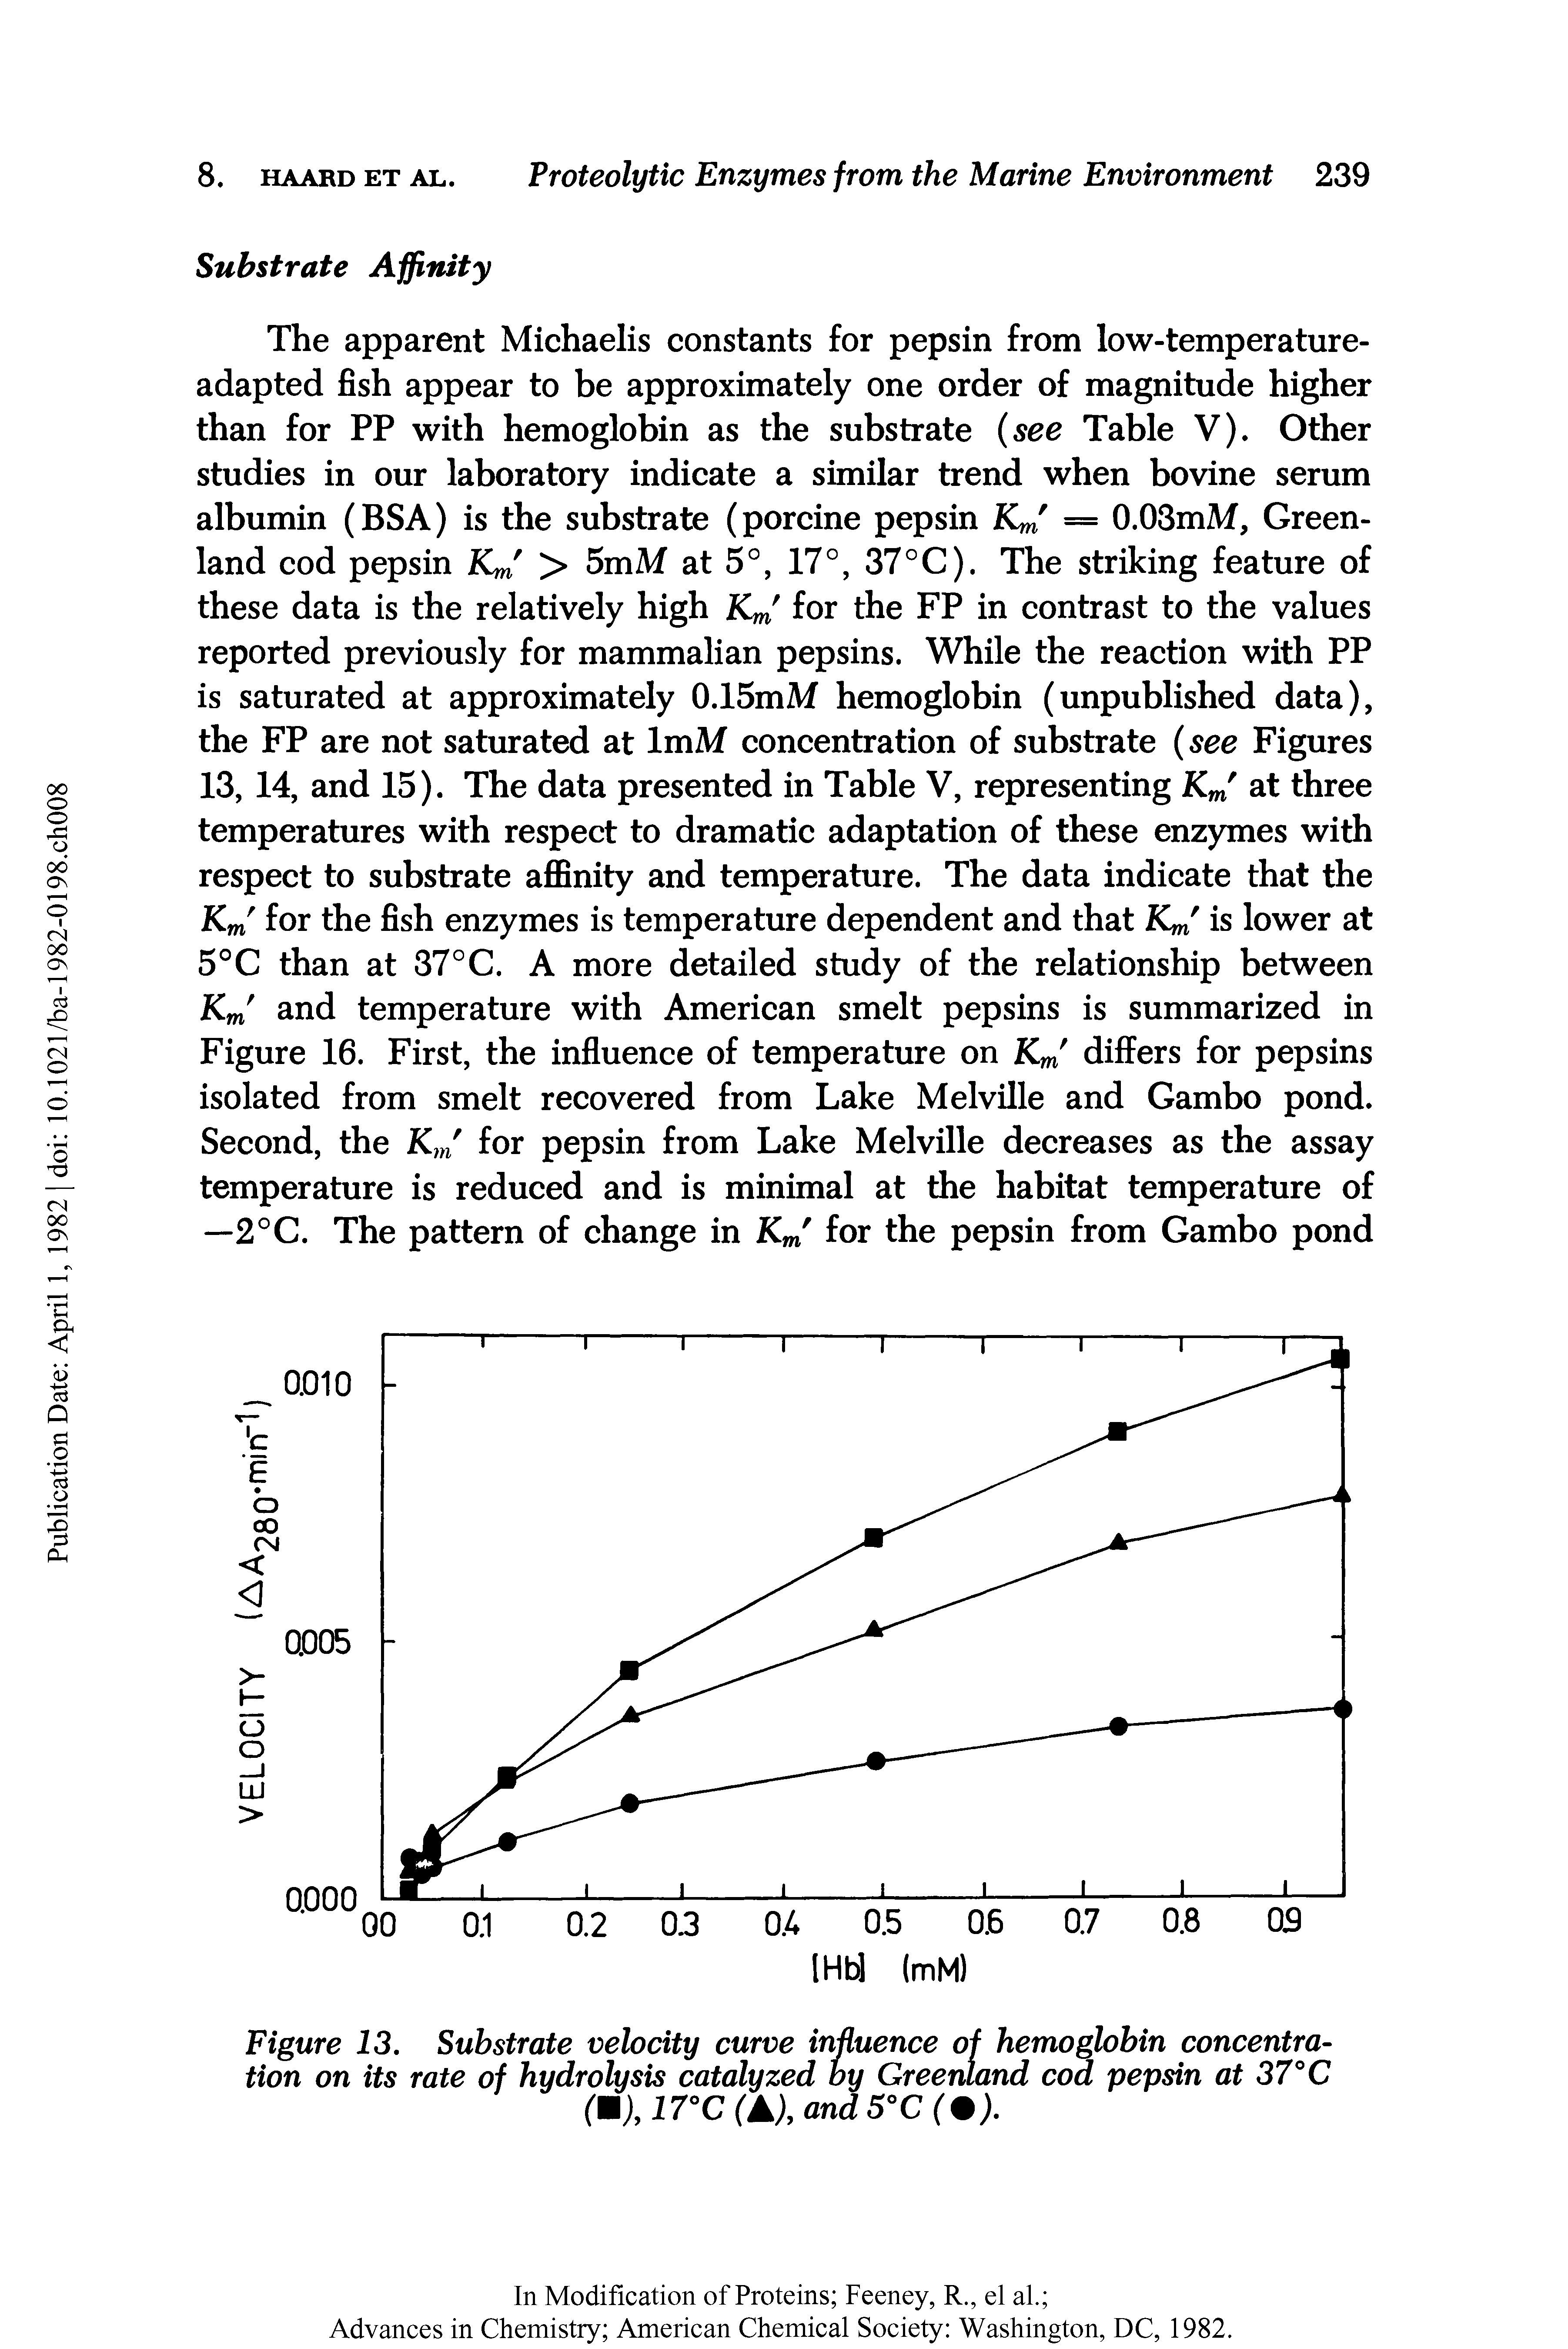 Figure 13. Substrate velocity curve influence of hemoglobin concentration on its rate of hydrolysis catalyzed by Greenland cod pepsin at 37°C (M), 17°C (A), and 5°C ( ).